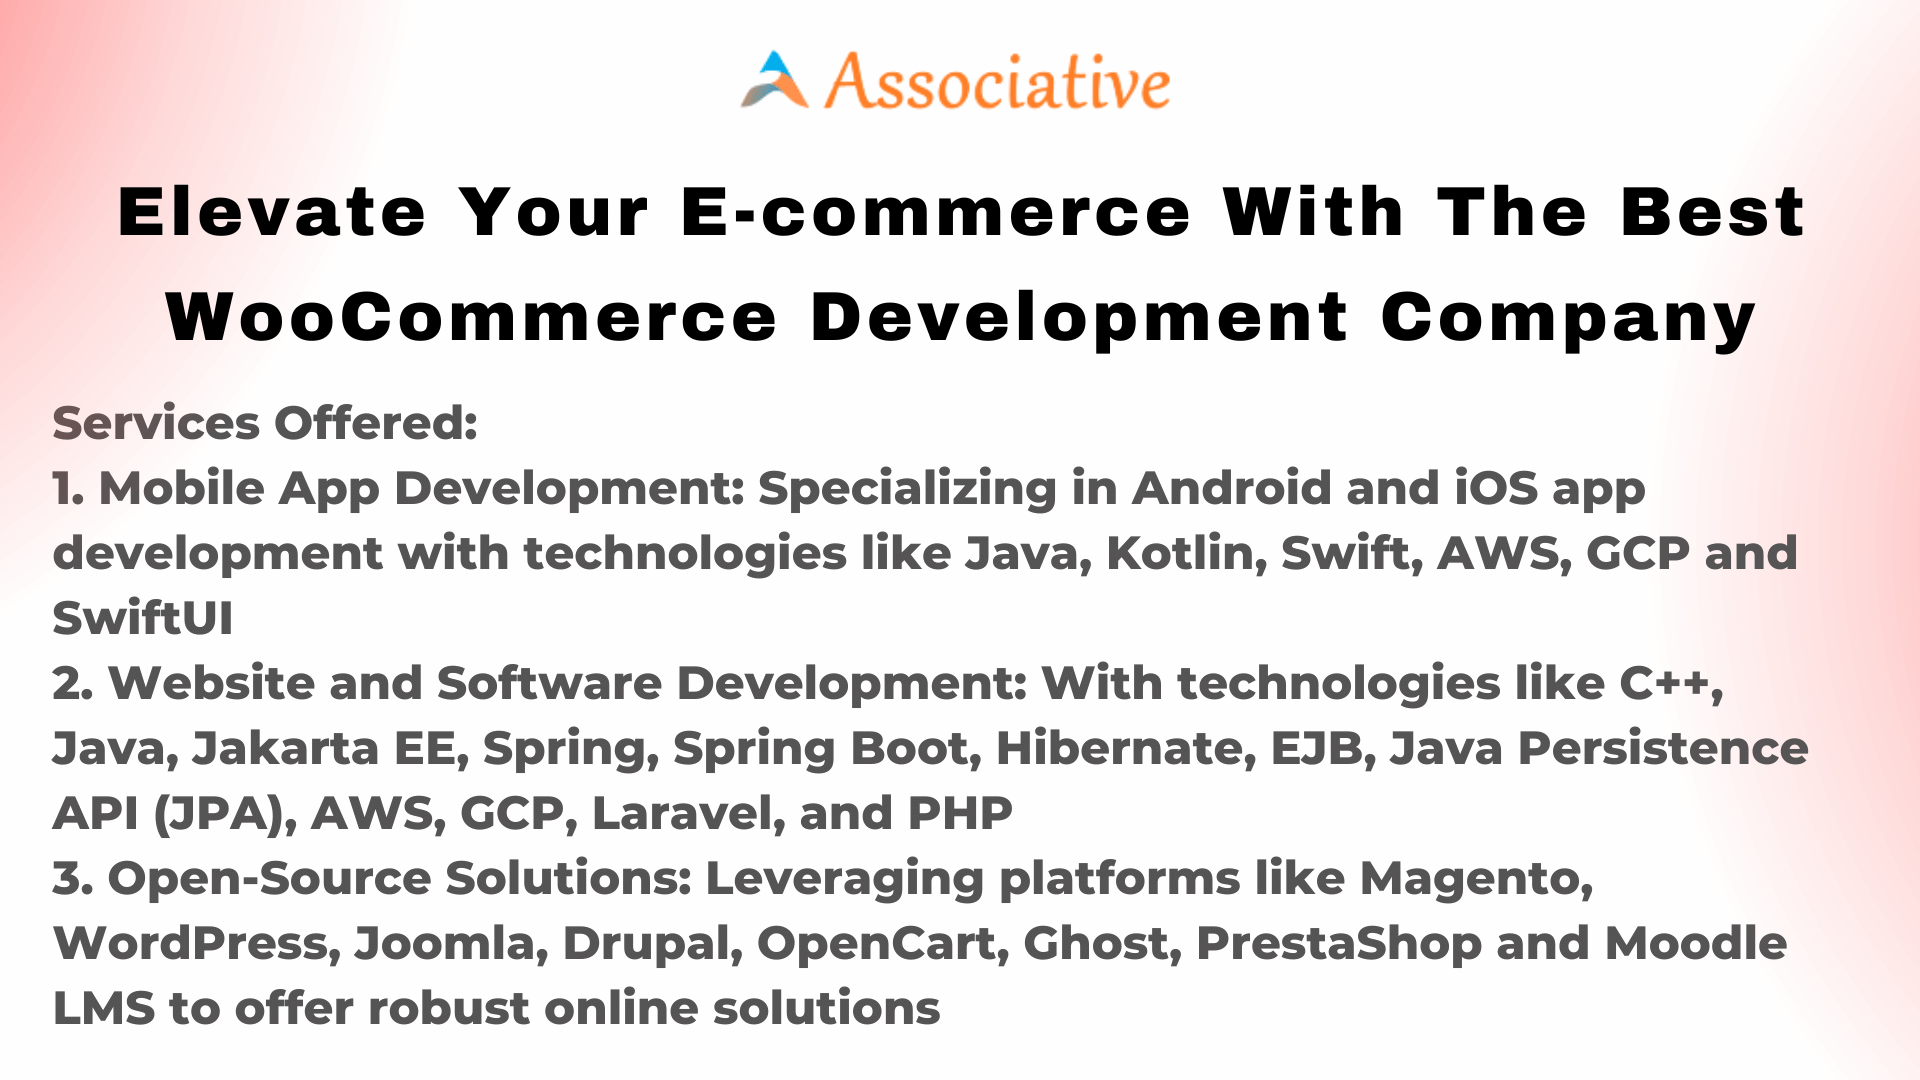 Elevate Your E-commerce with the Best WooCommerce Development Company